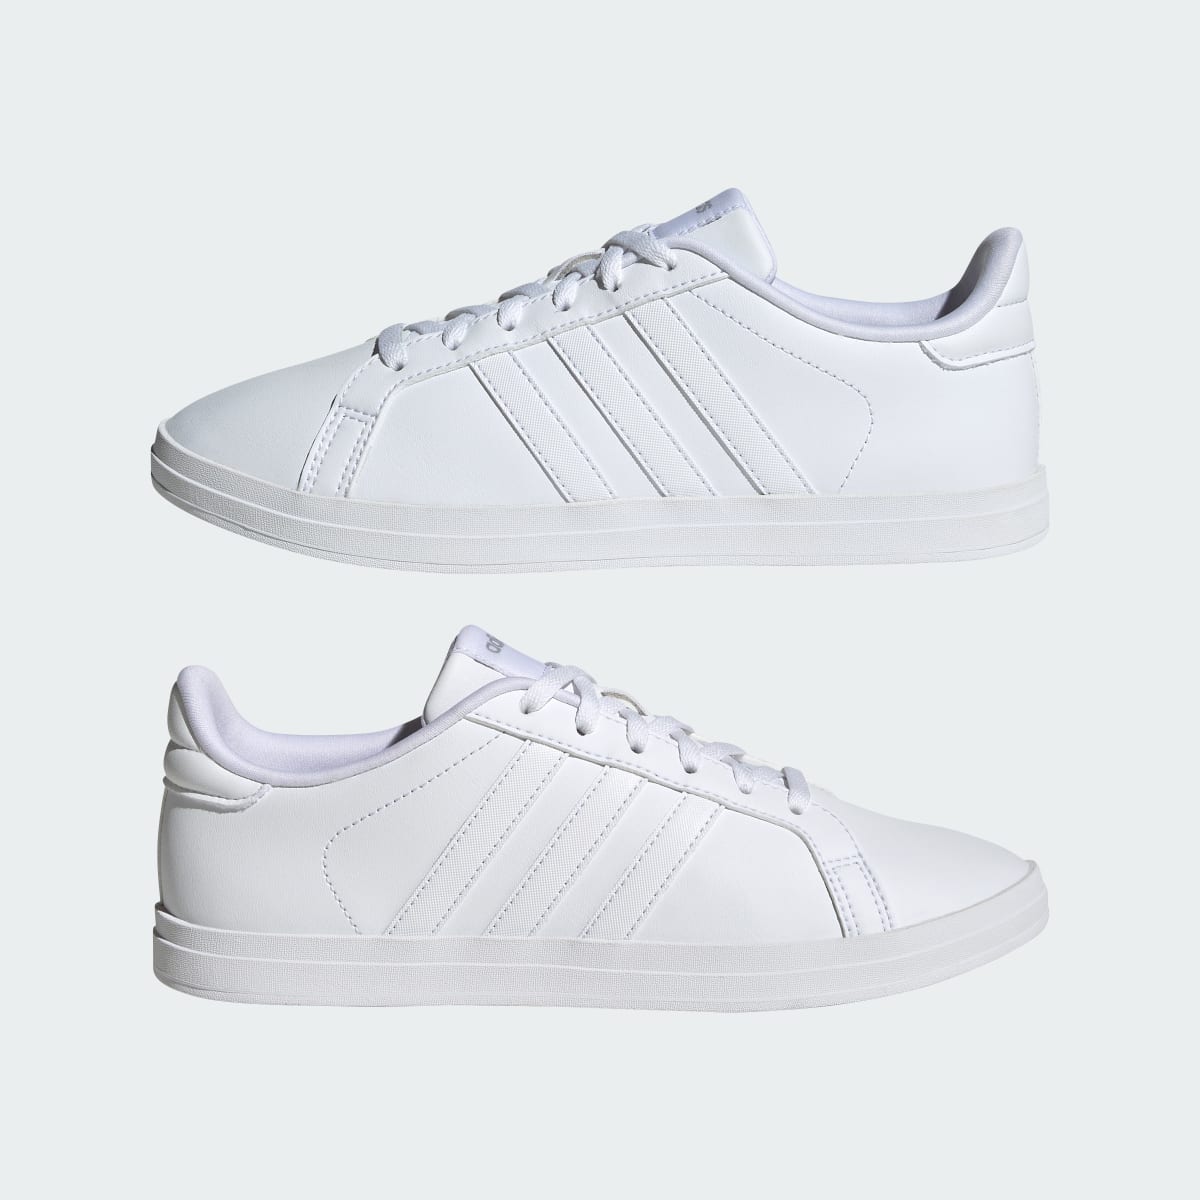 Adidas Courtpoint X Shoes. 8